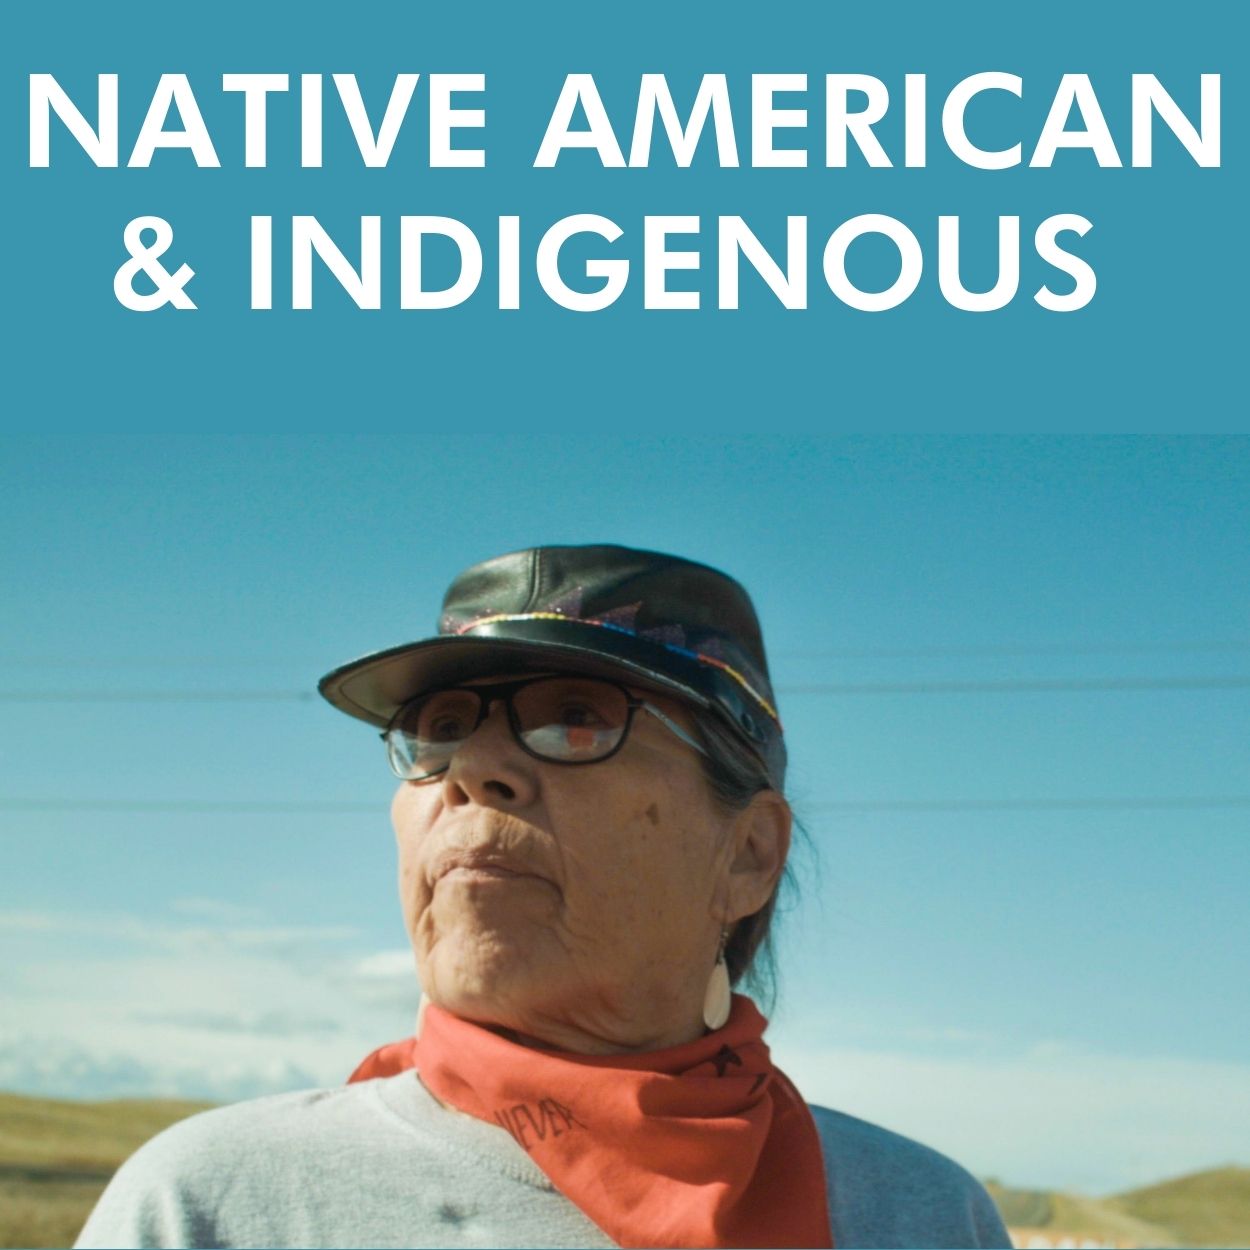 NATIVE AMERICAN & INDIGENOUS VOICES